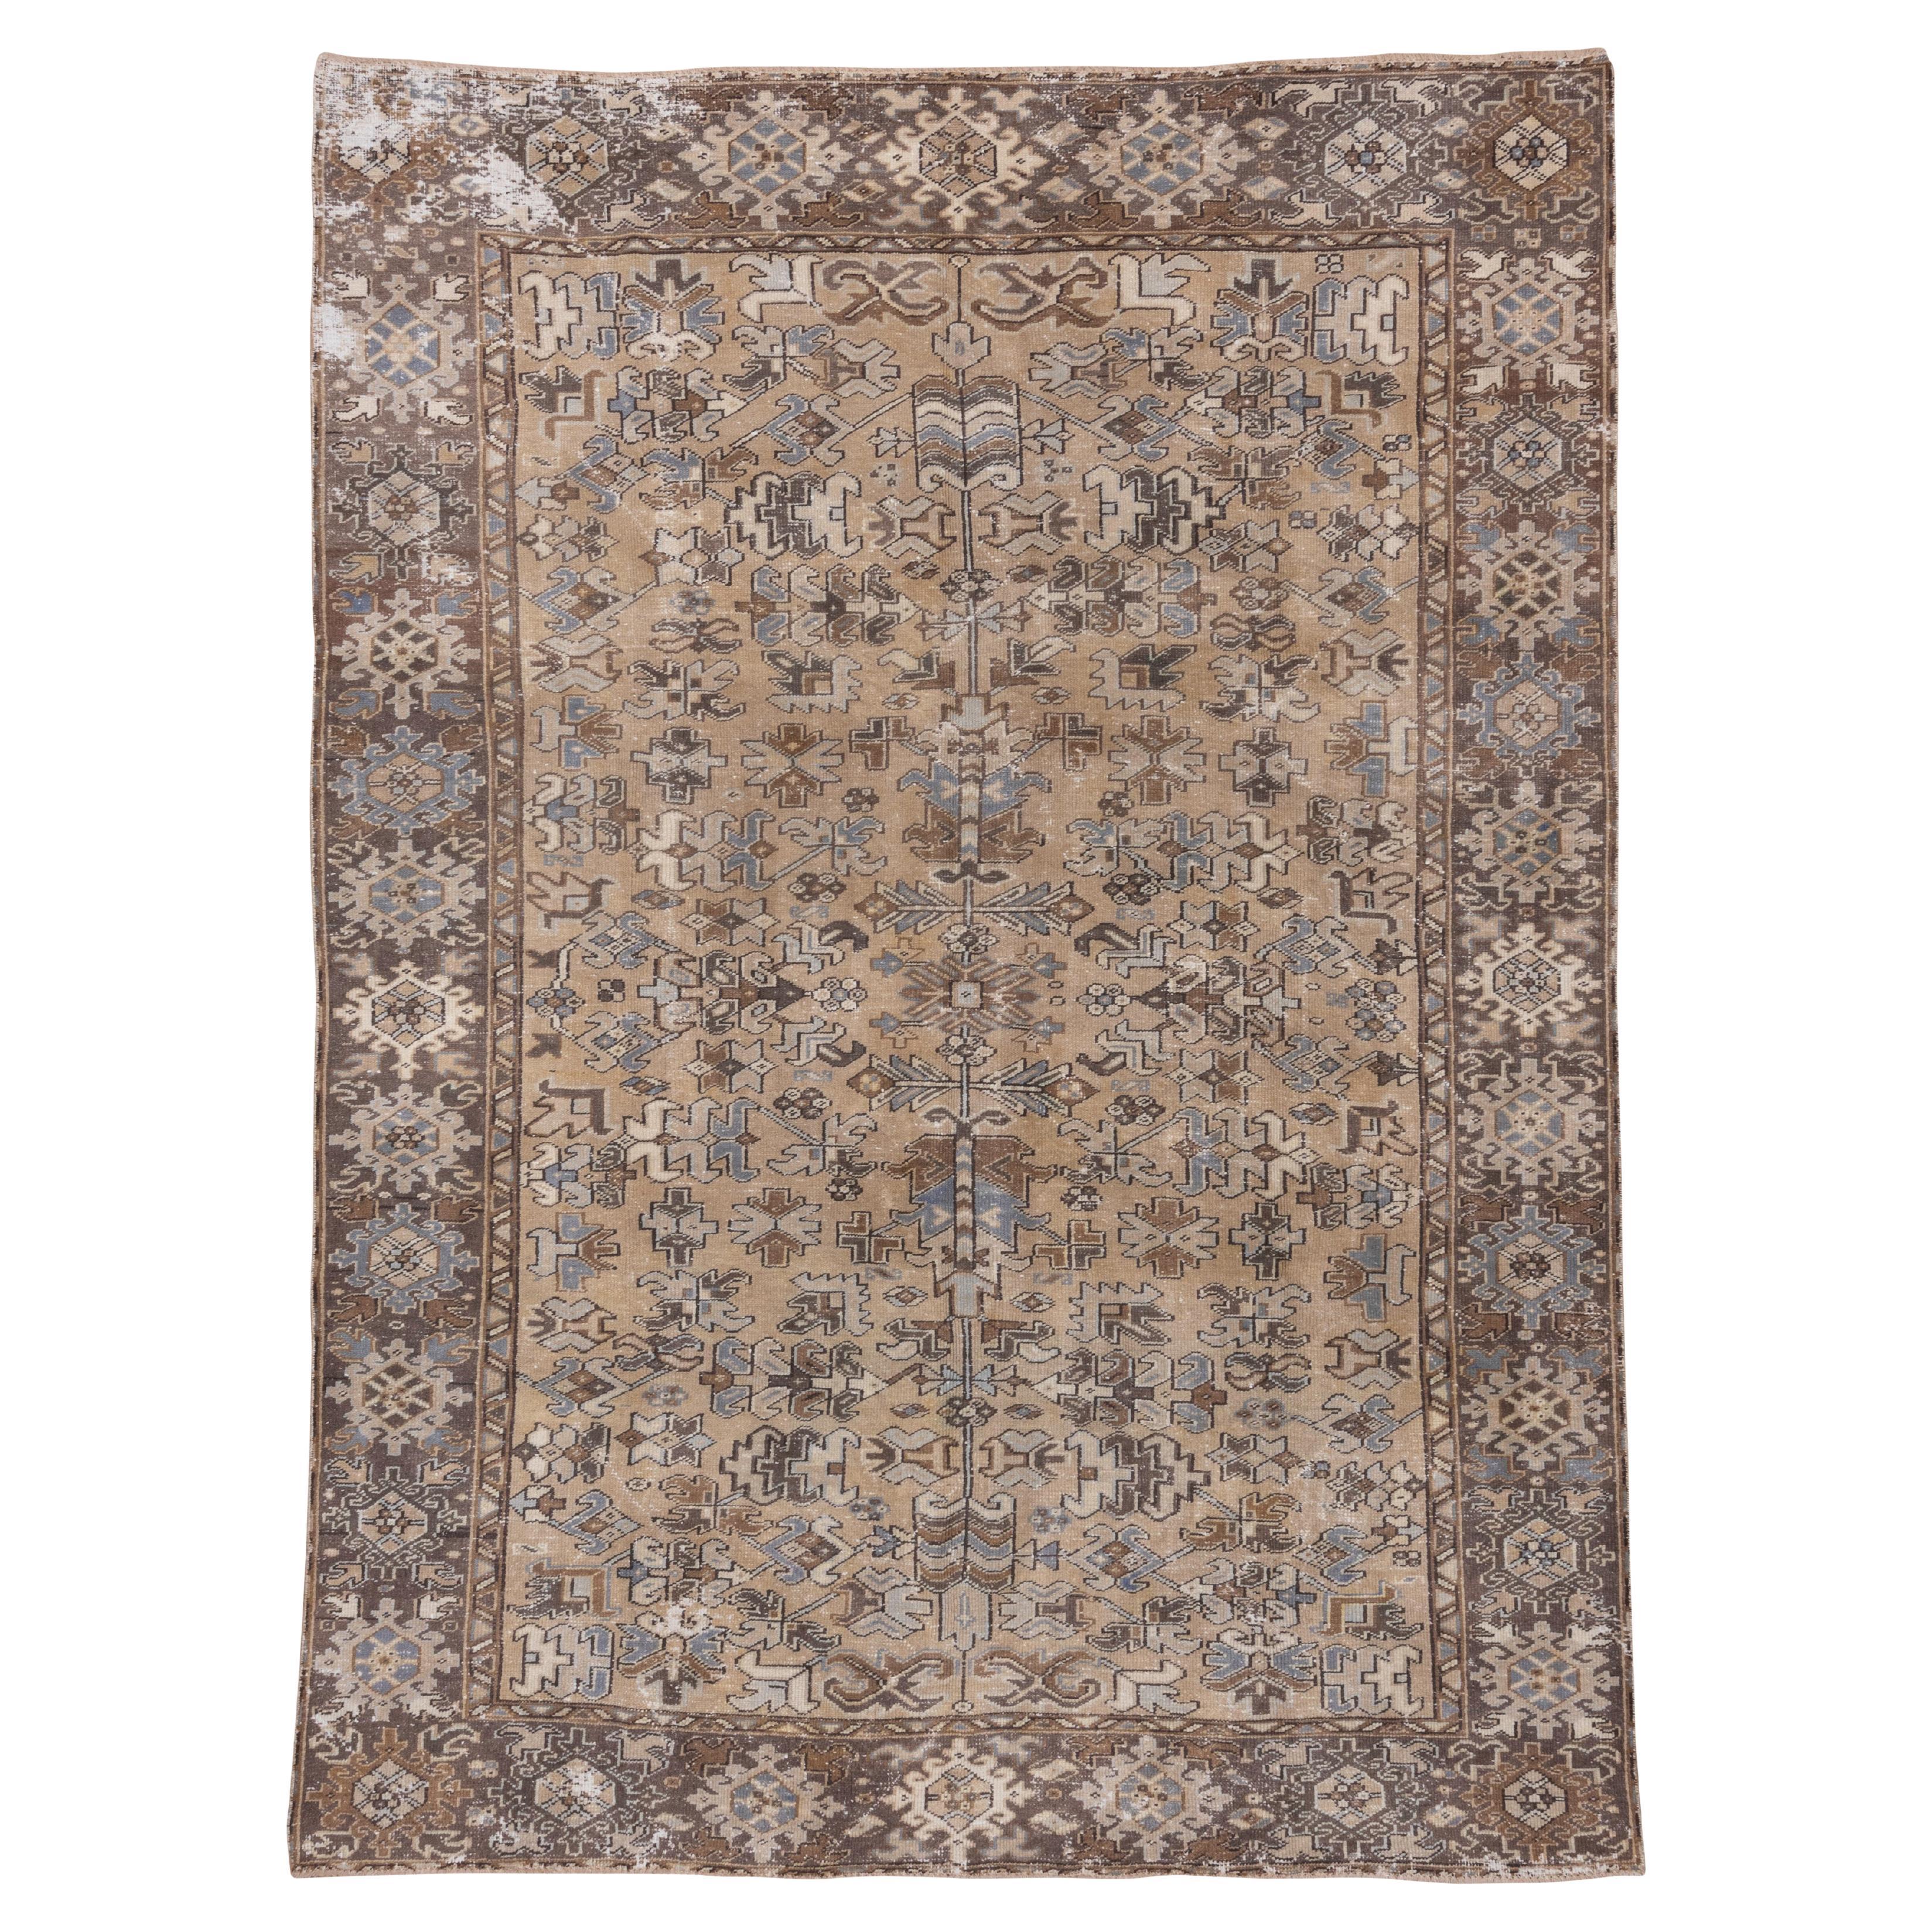 1930s Antique Persian Heriz Rug, Beige Allover Field, Periwinkle & Ivory Accents For Sale